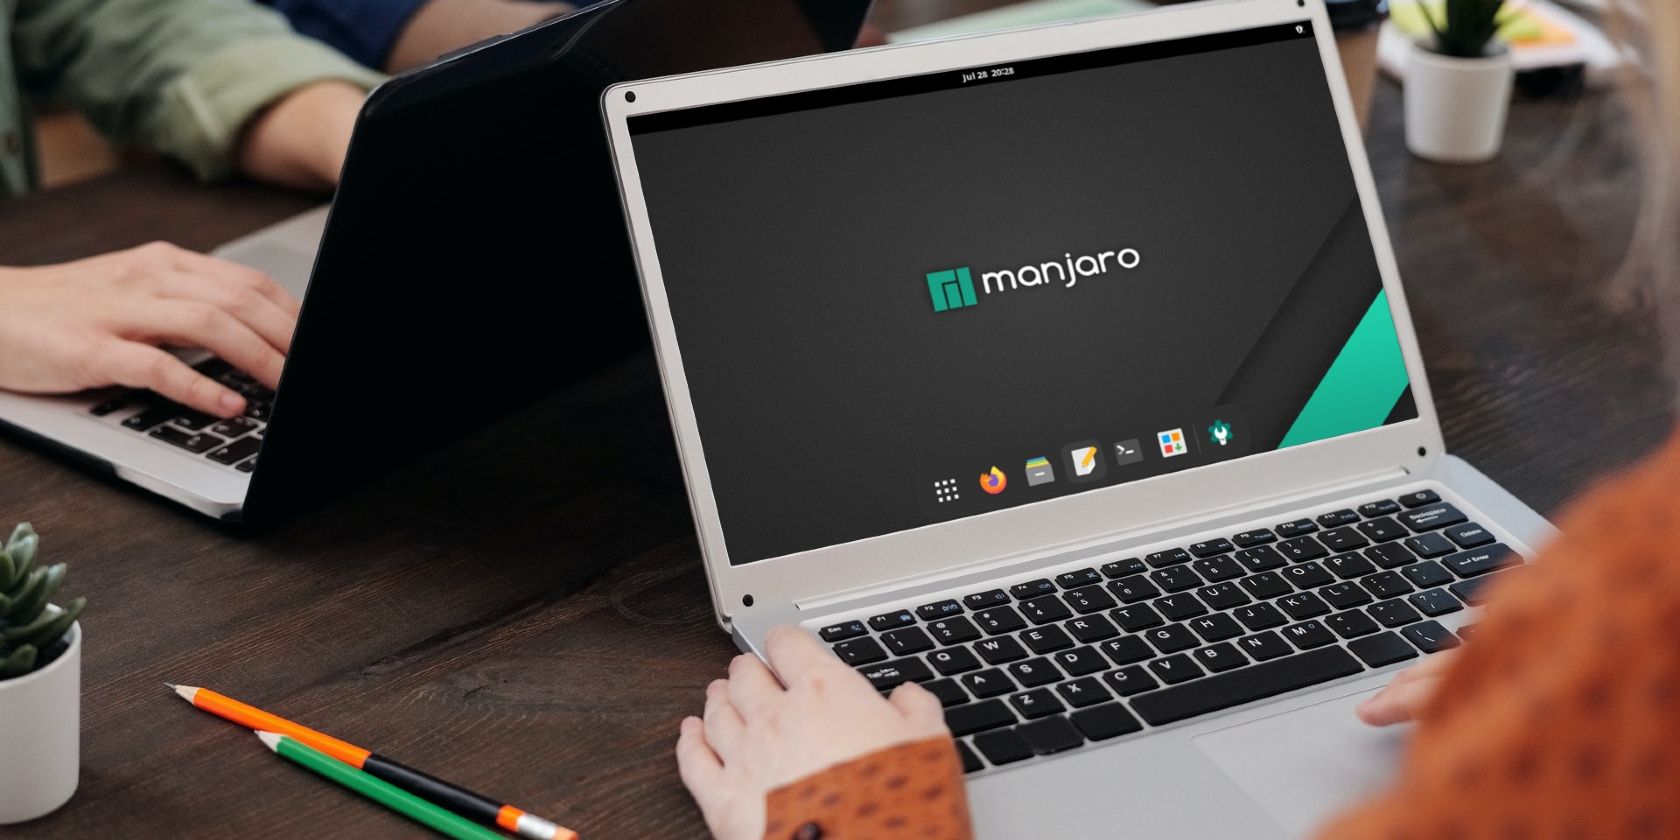 How to Install Manjaro Linux on PC